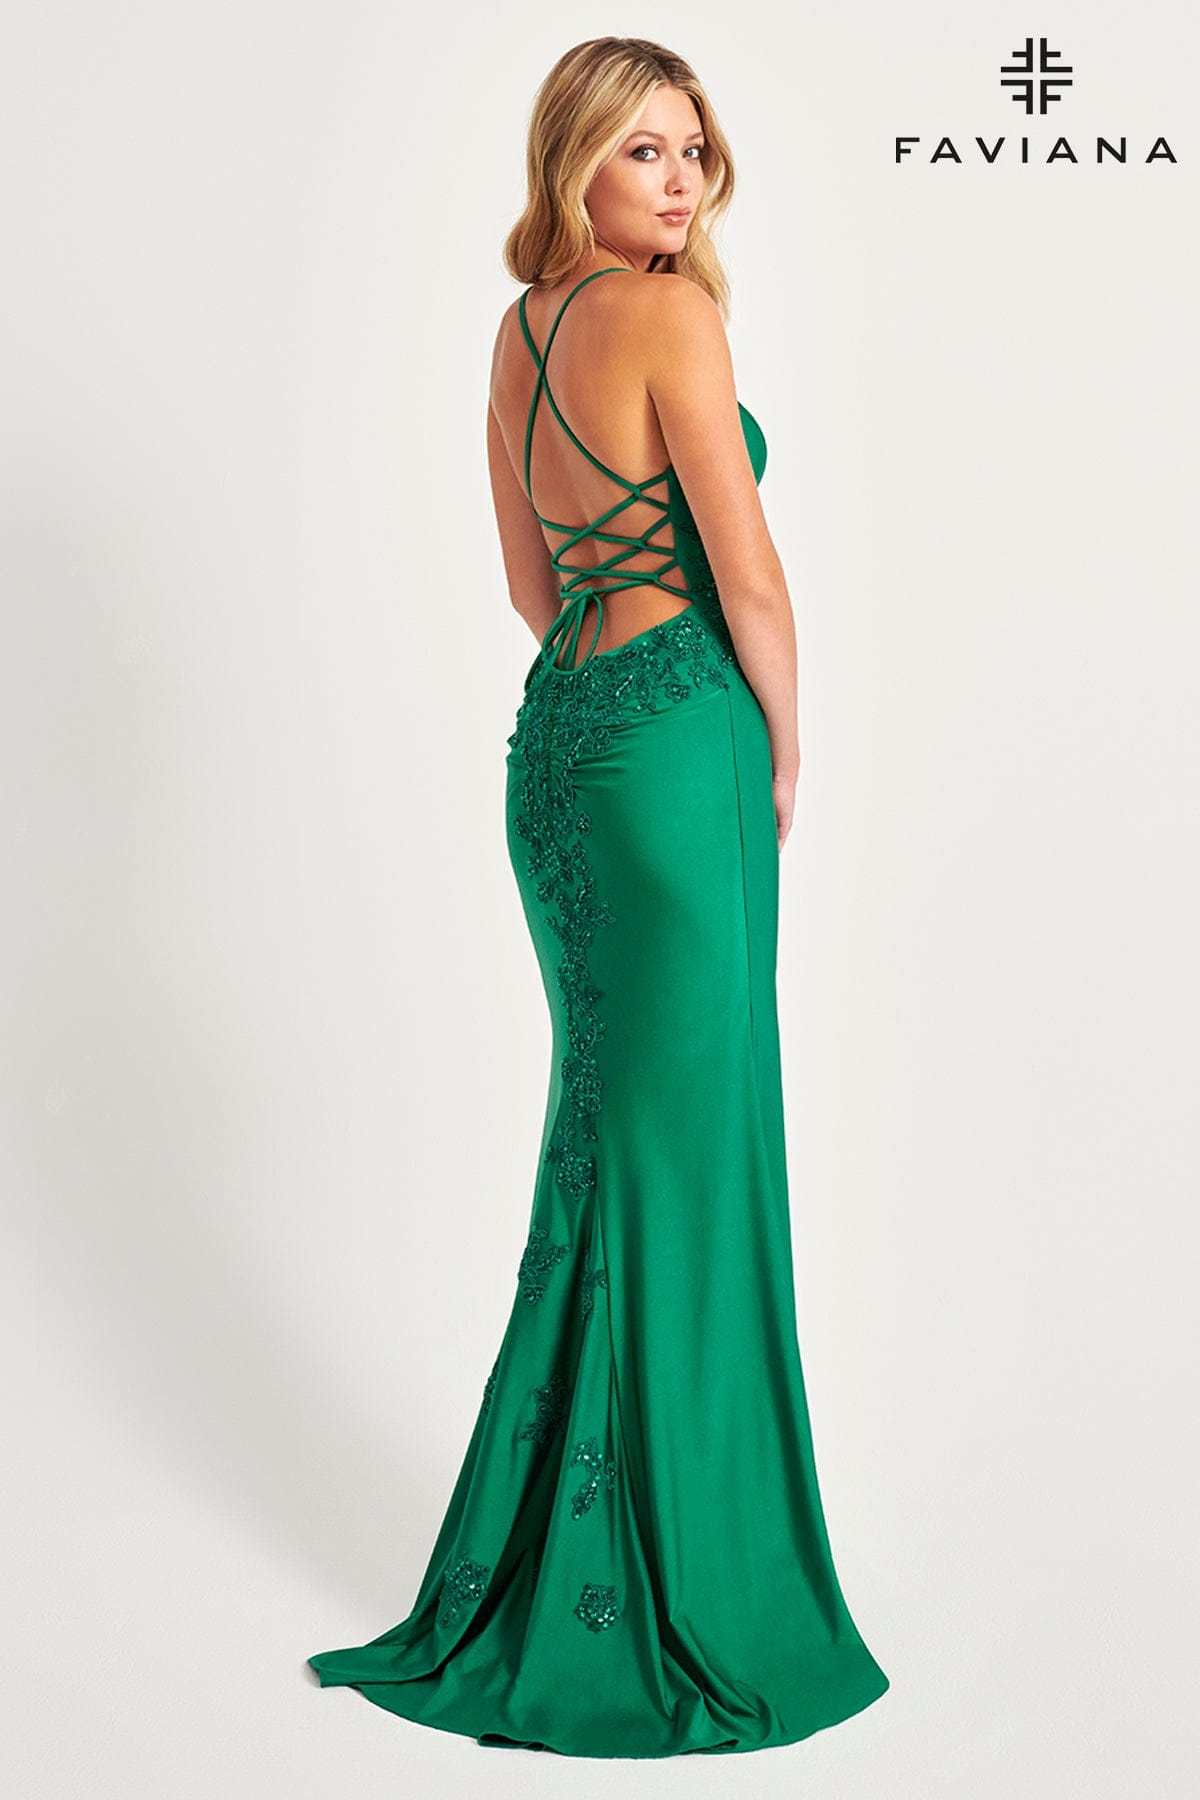 Dark Emerald V-Neck Lace Up Back Long Dress With Beaded Lace At Waist